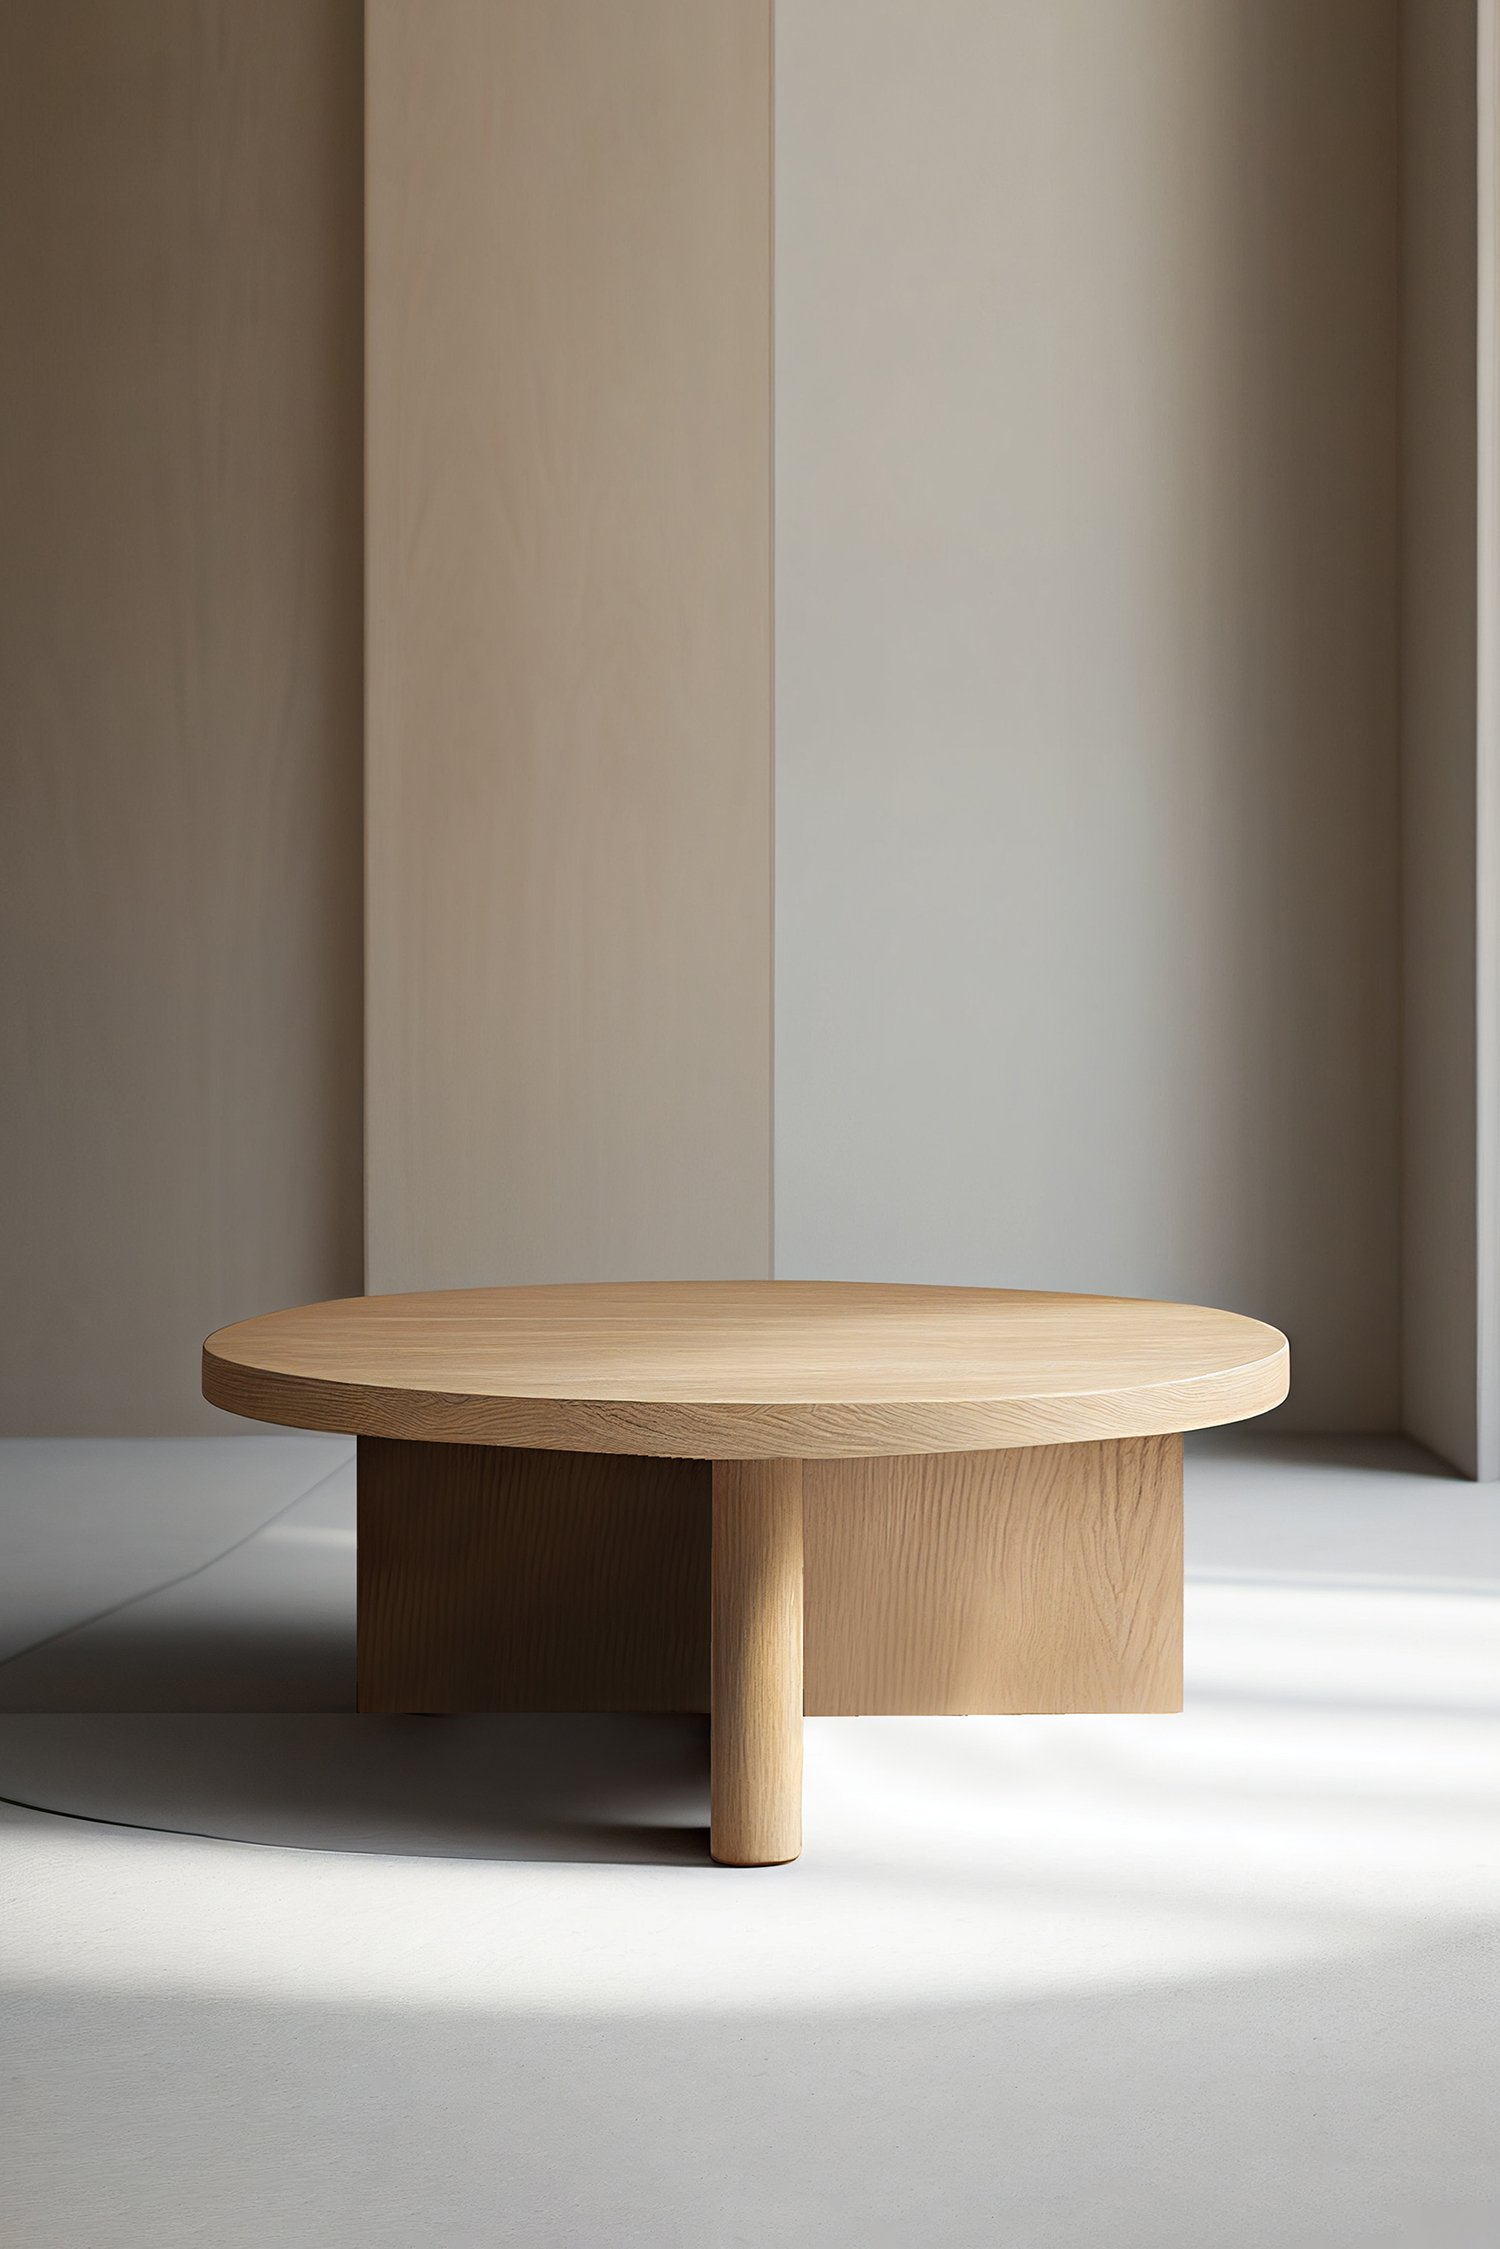 Cruciform Solid Wood Round Table By NONO 2.jpg